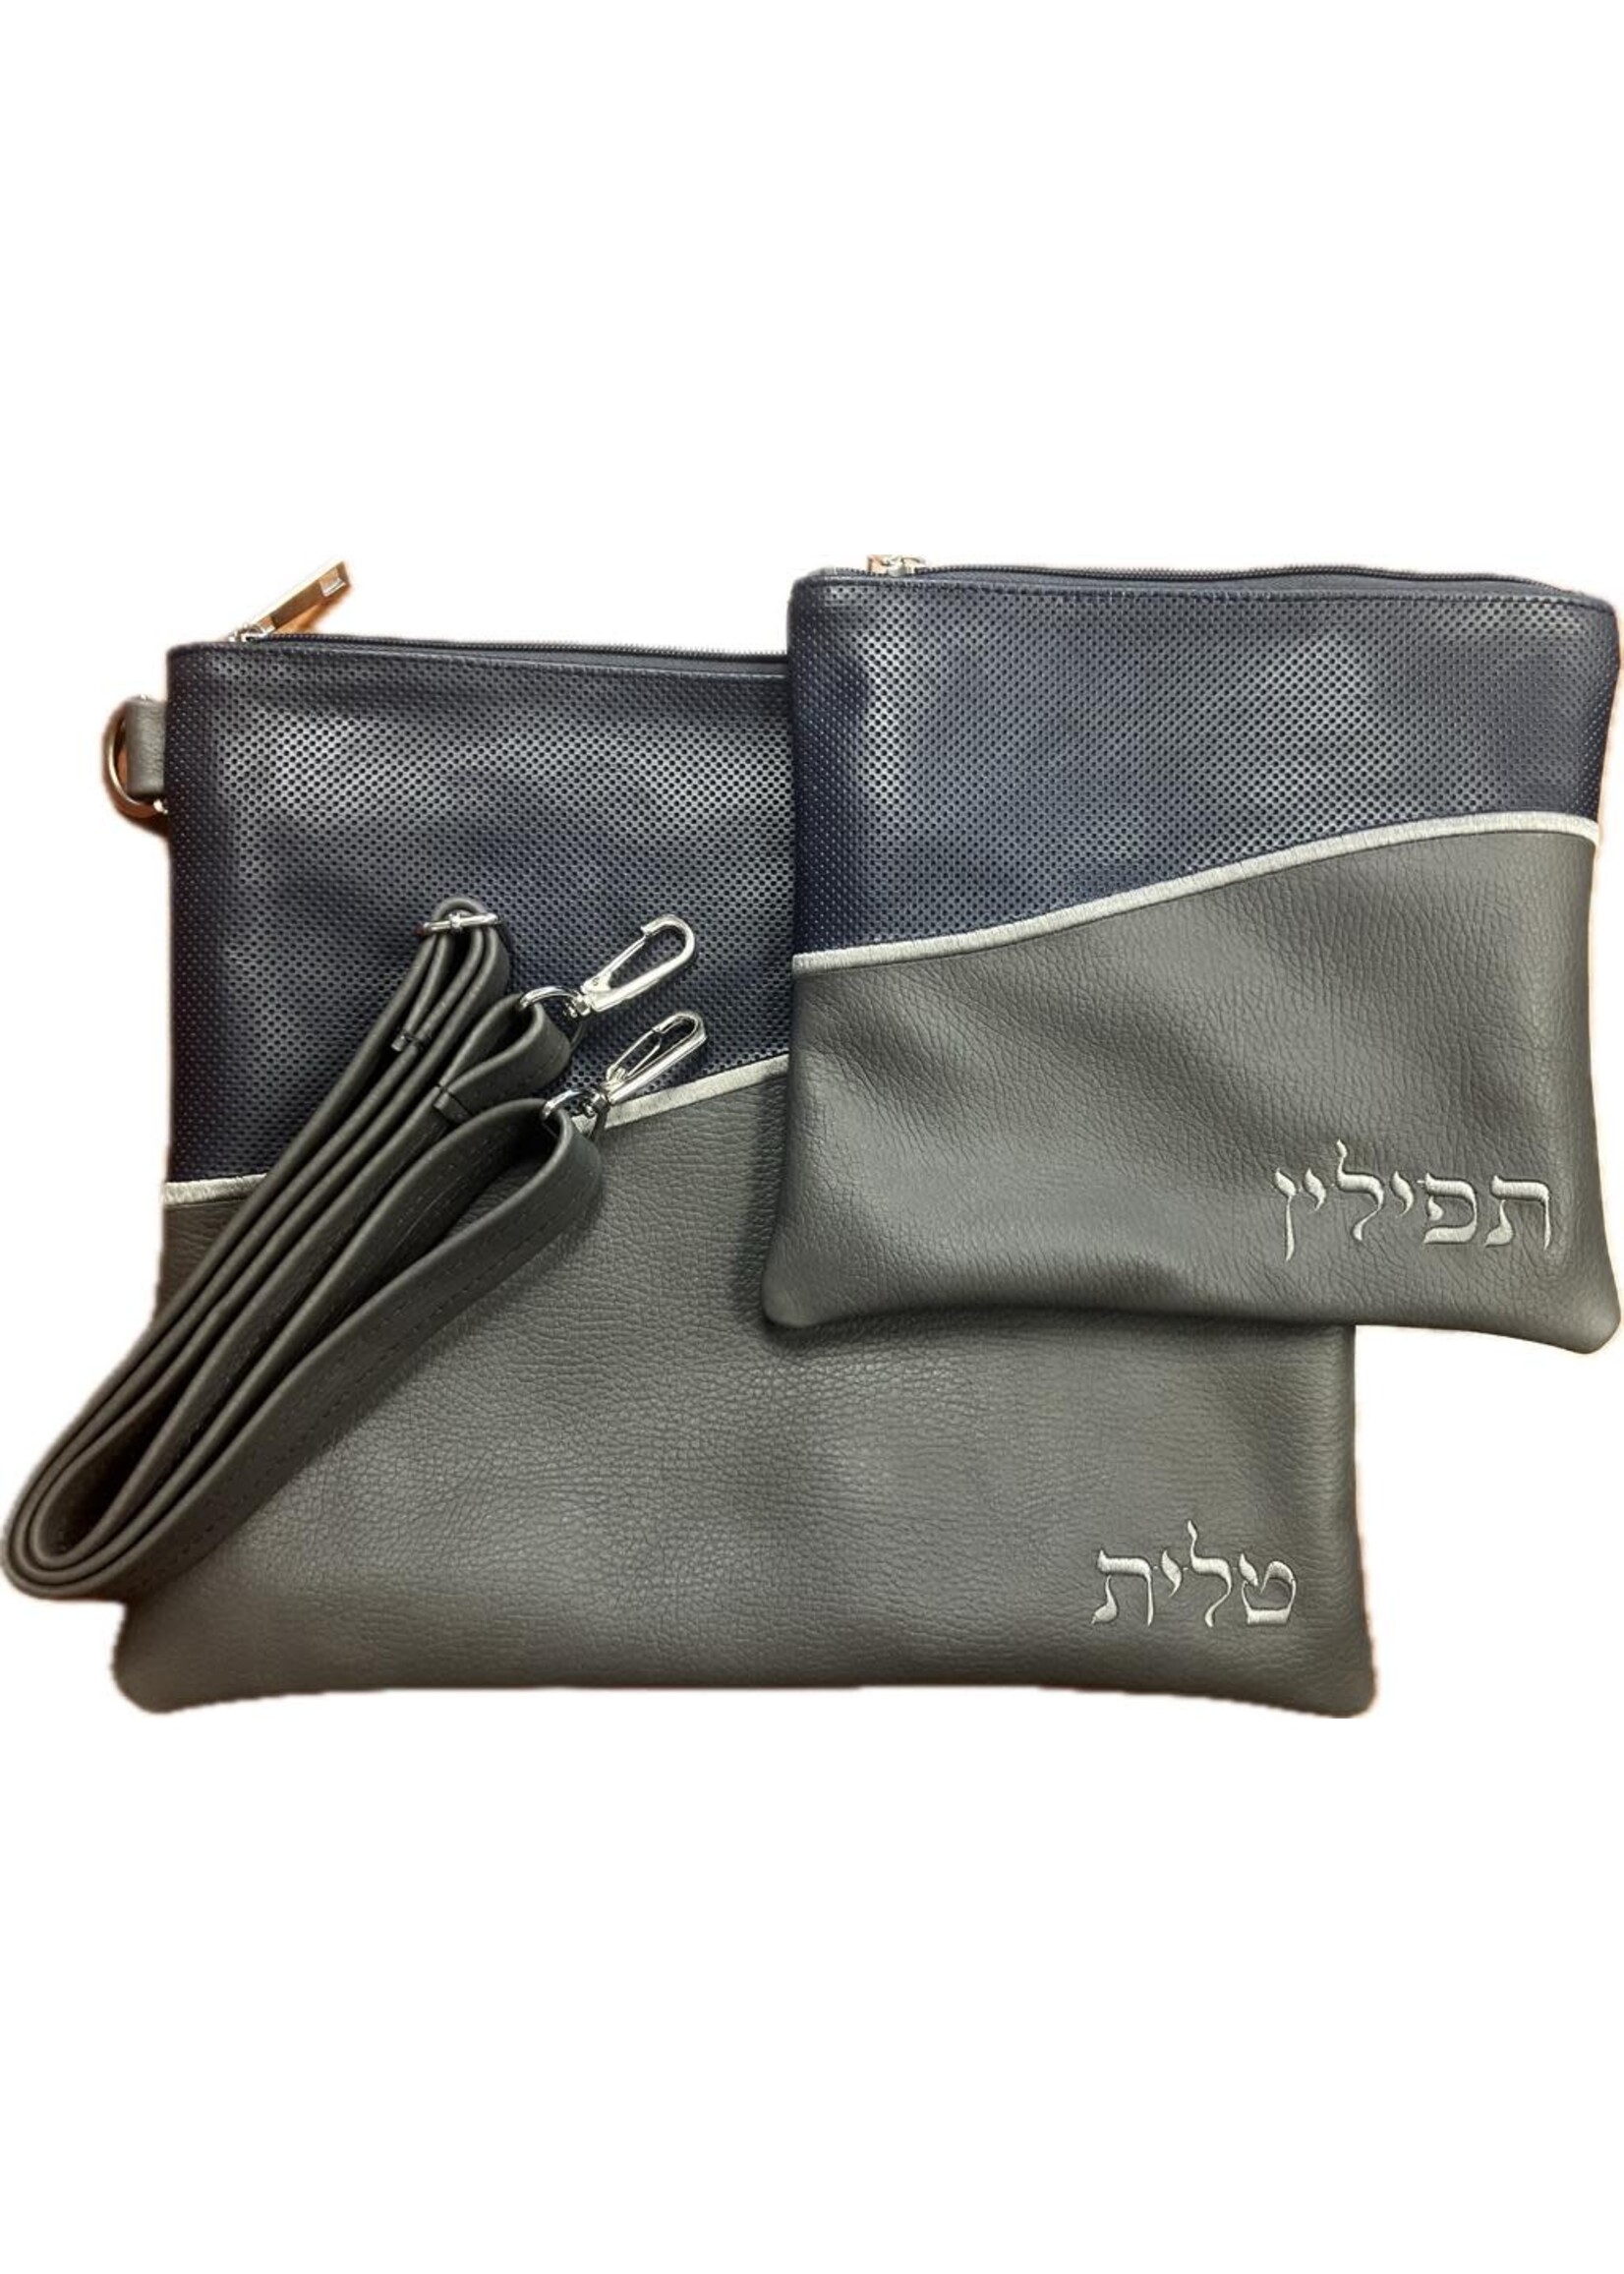 TALLIS AND TEFILLIN BAG SET- GENUINE LEATHER-NAVY AND GREY